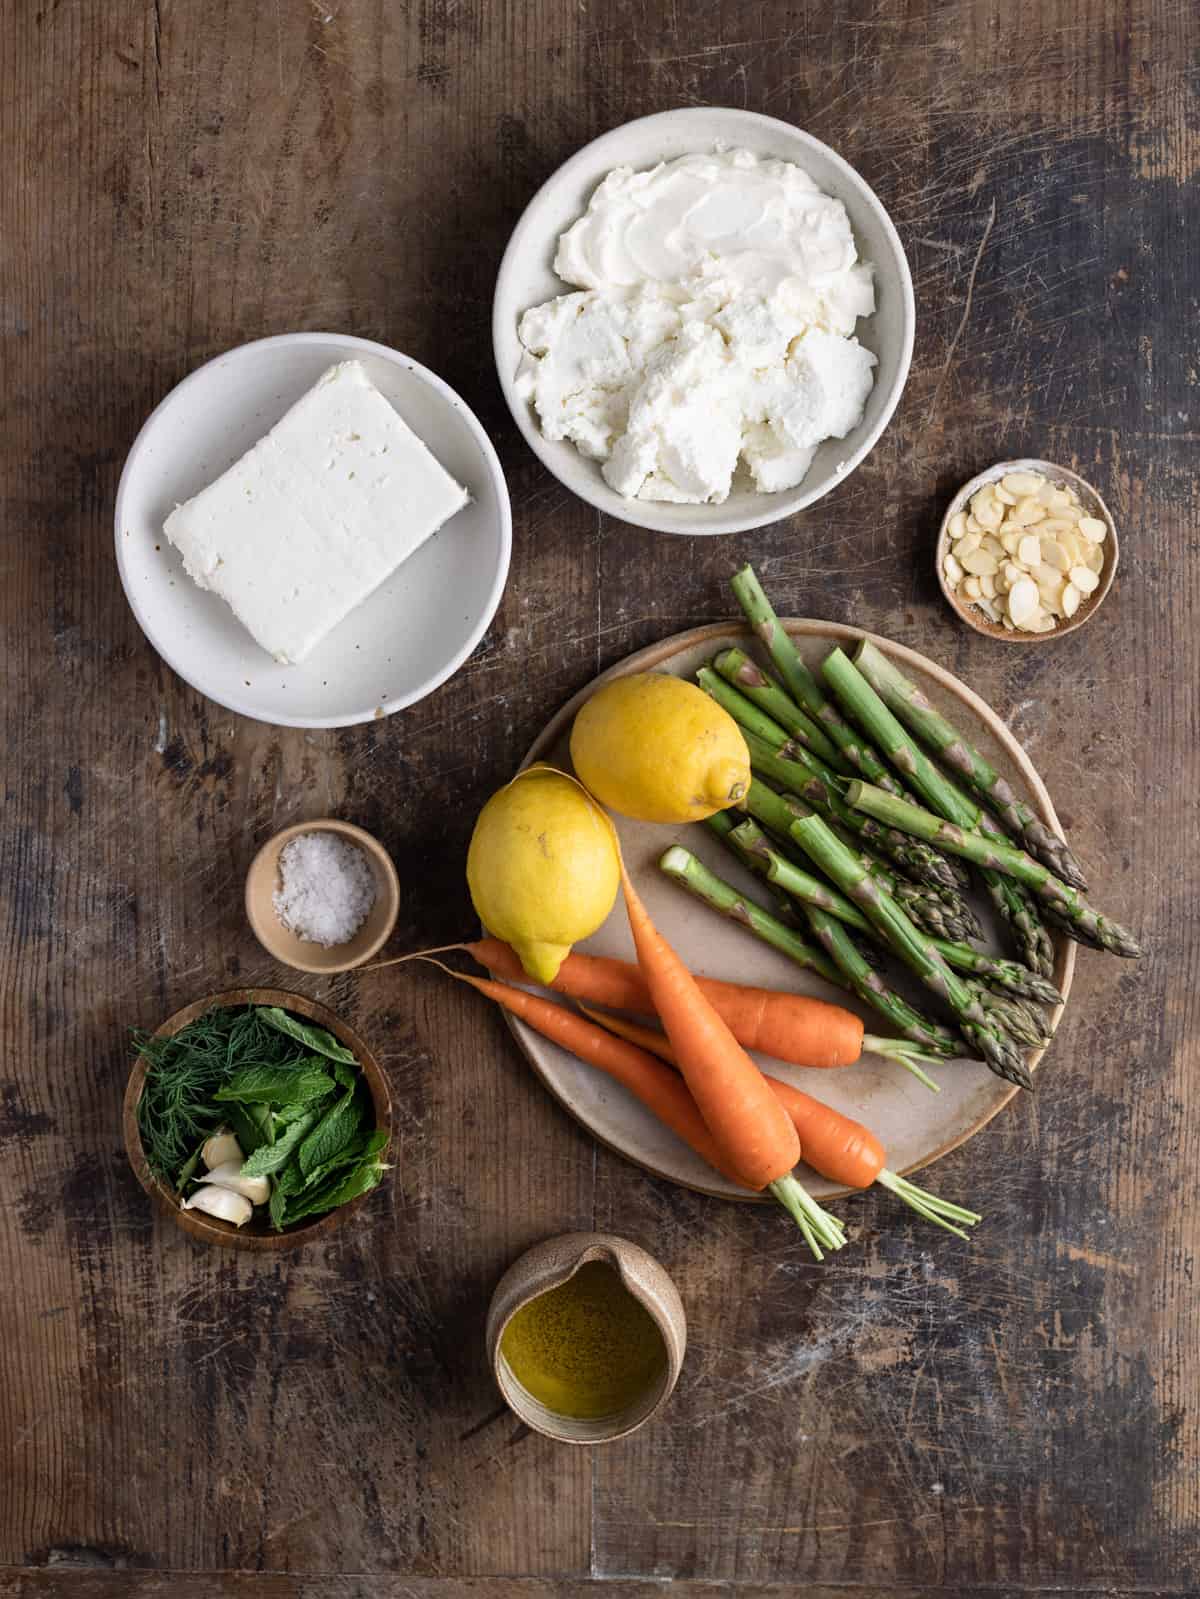 Overhead shot of ingredients in bowls and plate on a wooden table.